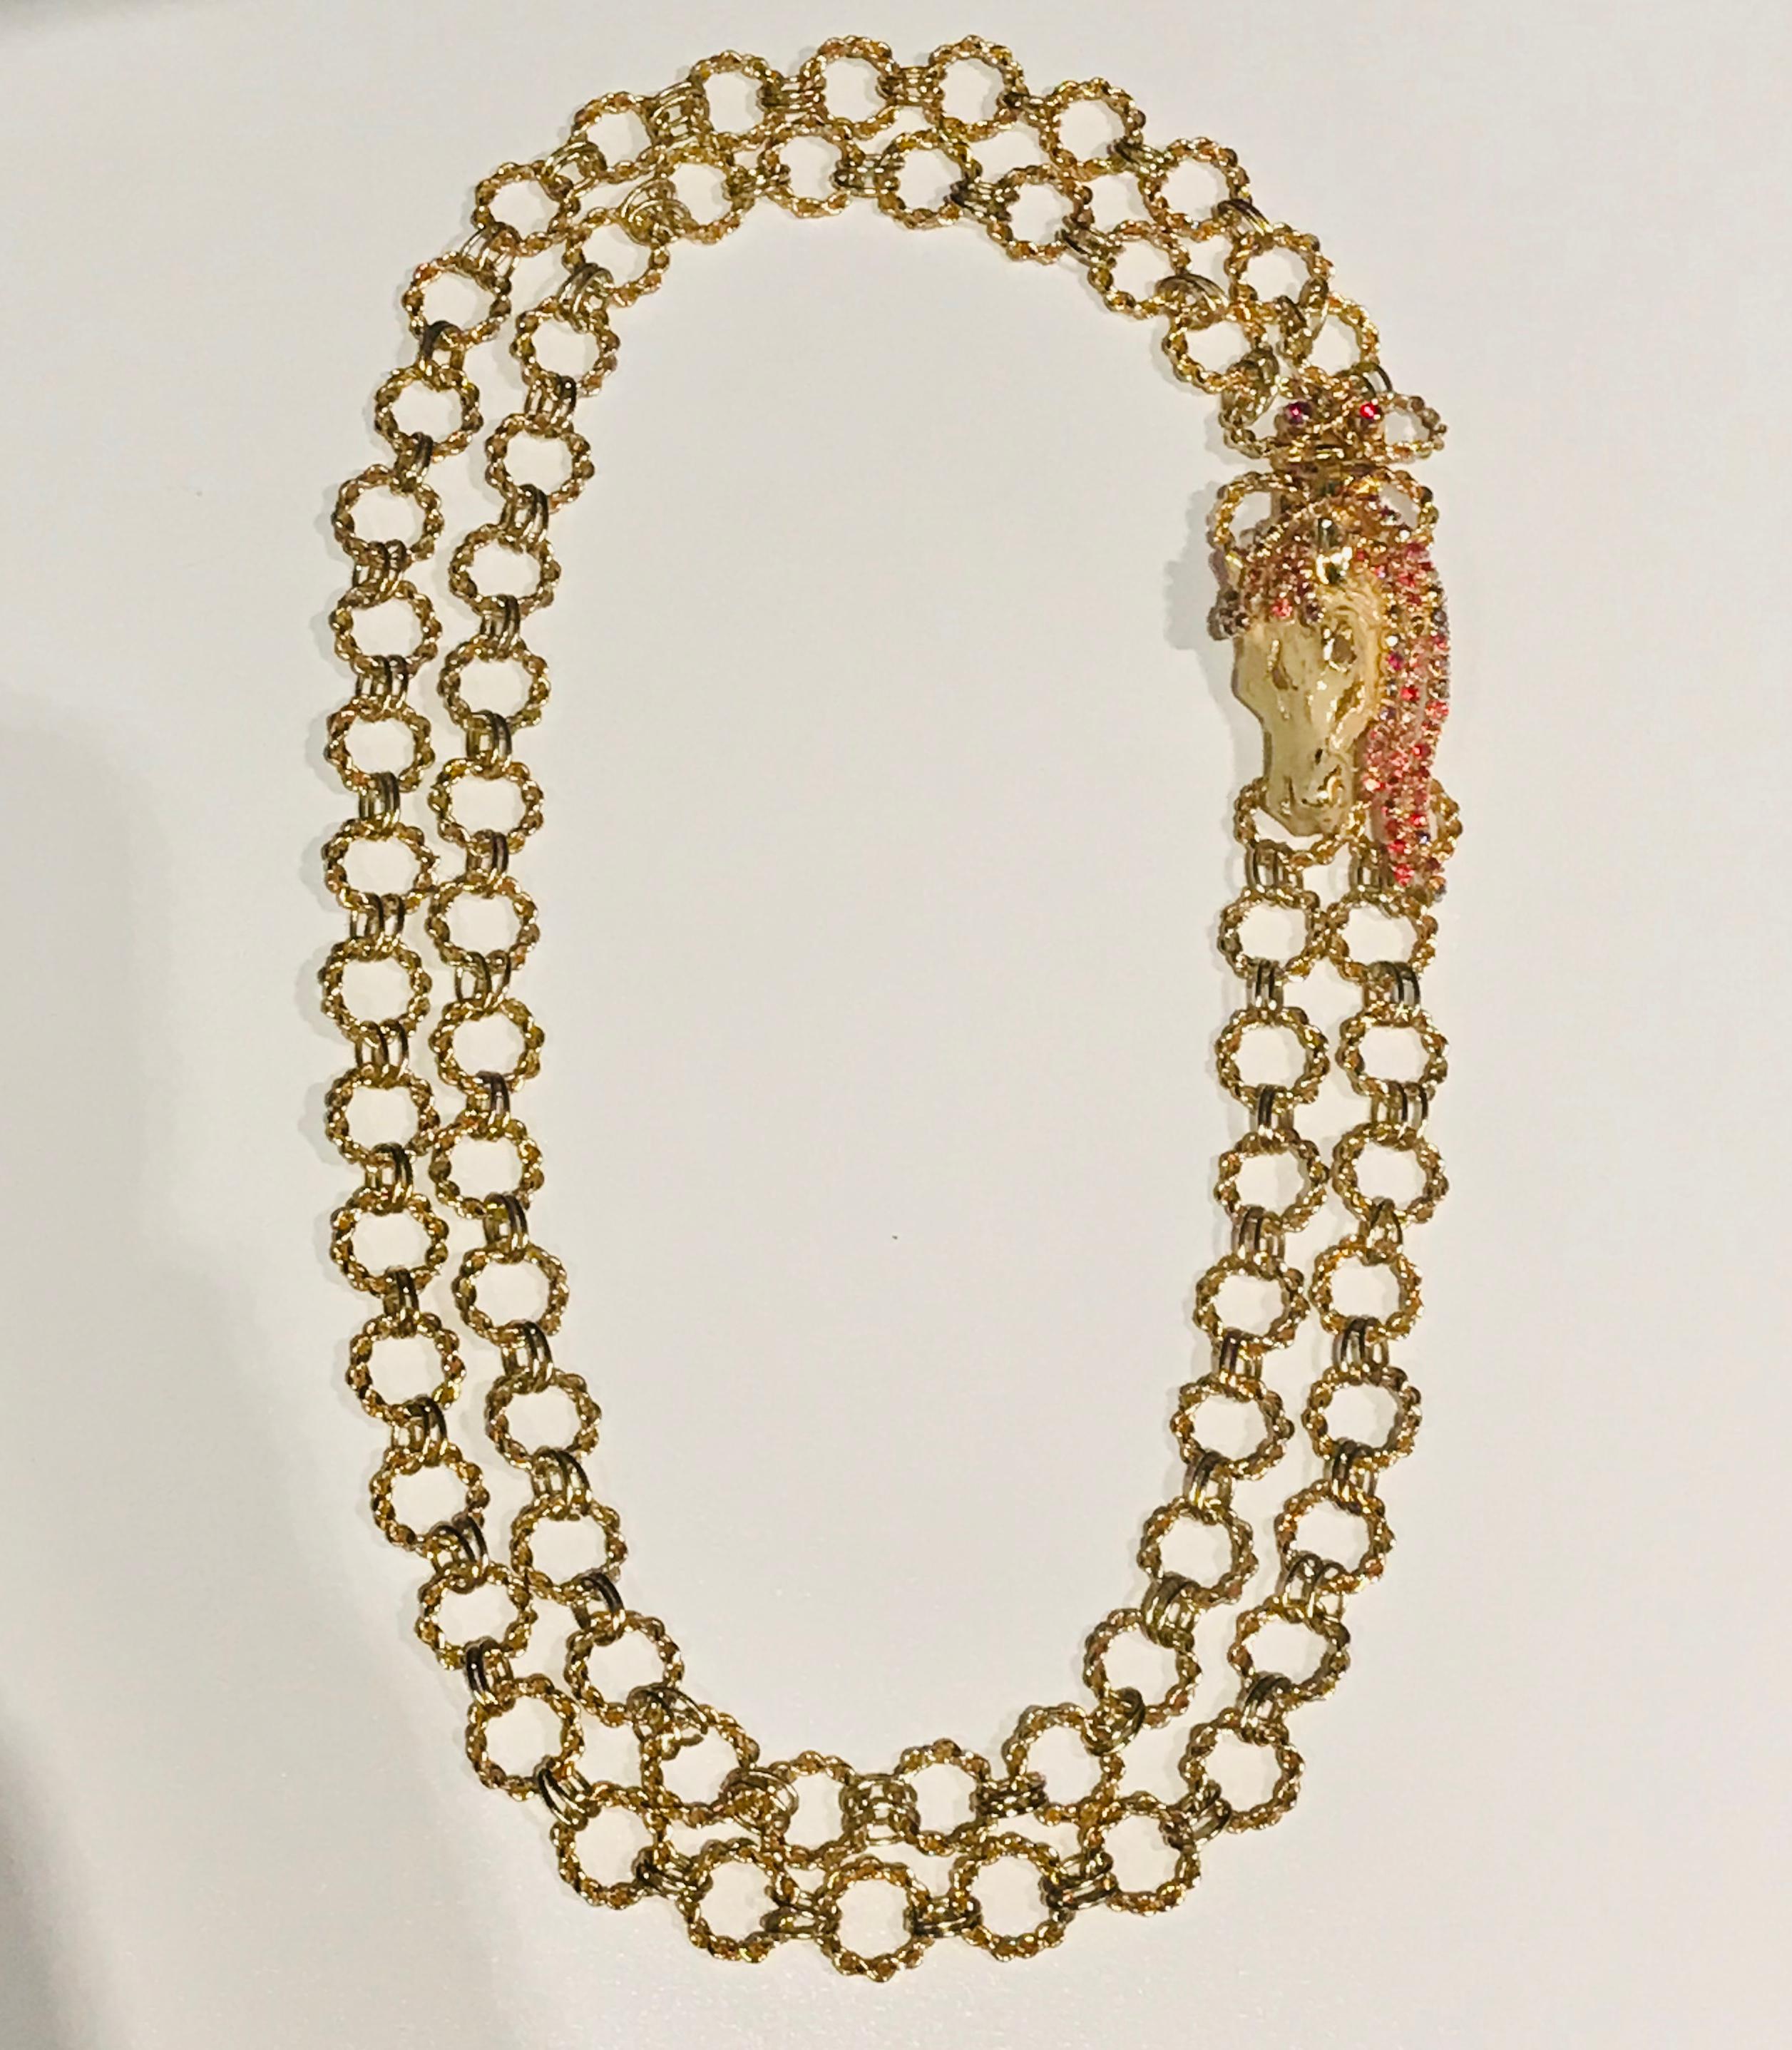 

A beautiful necklace by Italian fashion jewelry company De Liguoro. The necklace has two strands made of small oval and larger round chain links. The two strands come together at a beautiful cast and three dimensional ivory enameled horse head